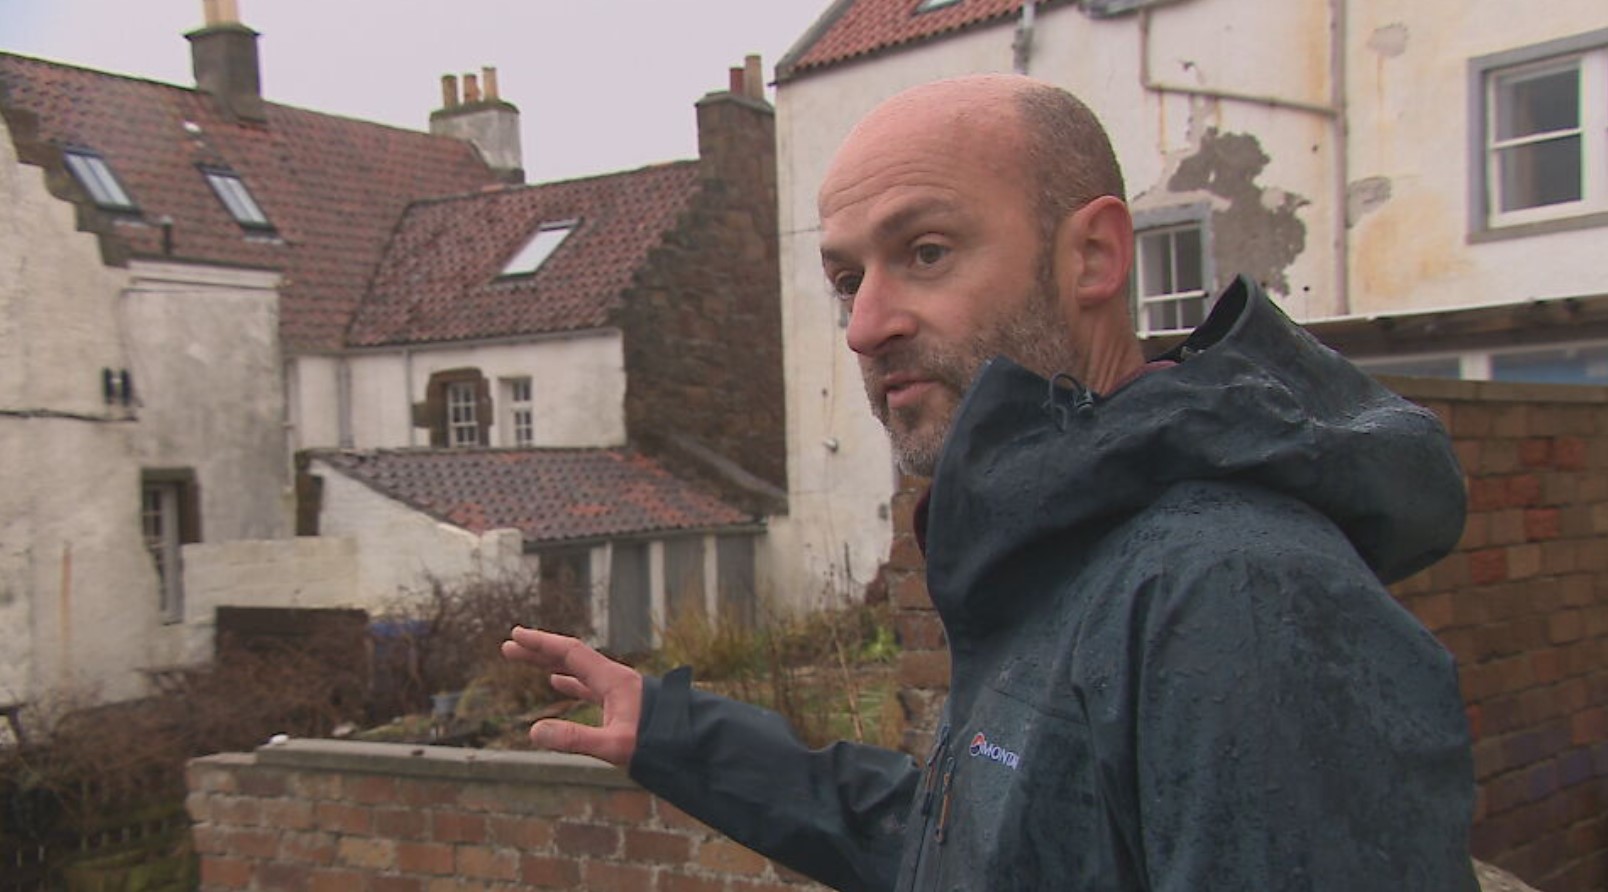 Rob Allen has lived in his home on Abbey Wall Road for six years